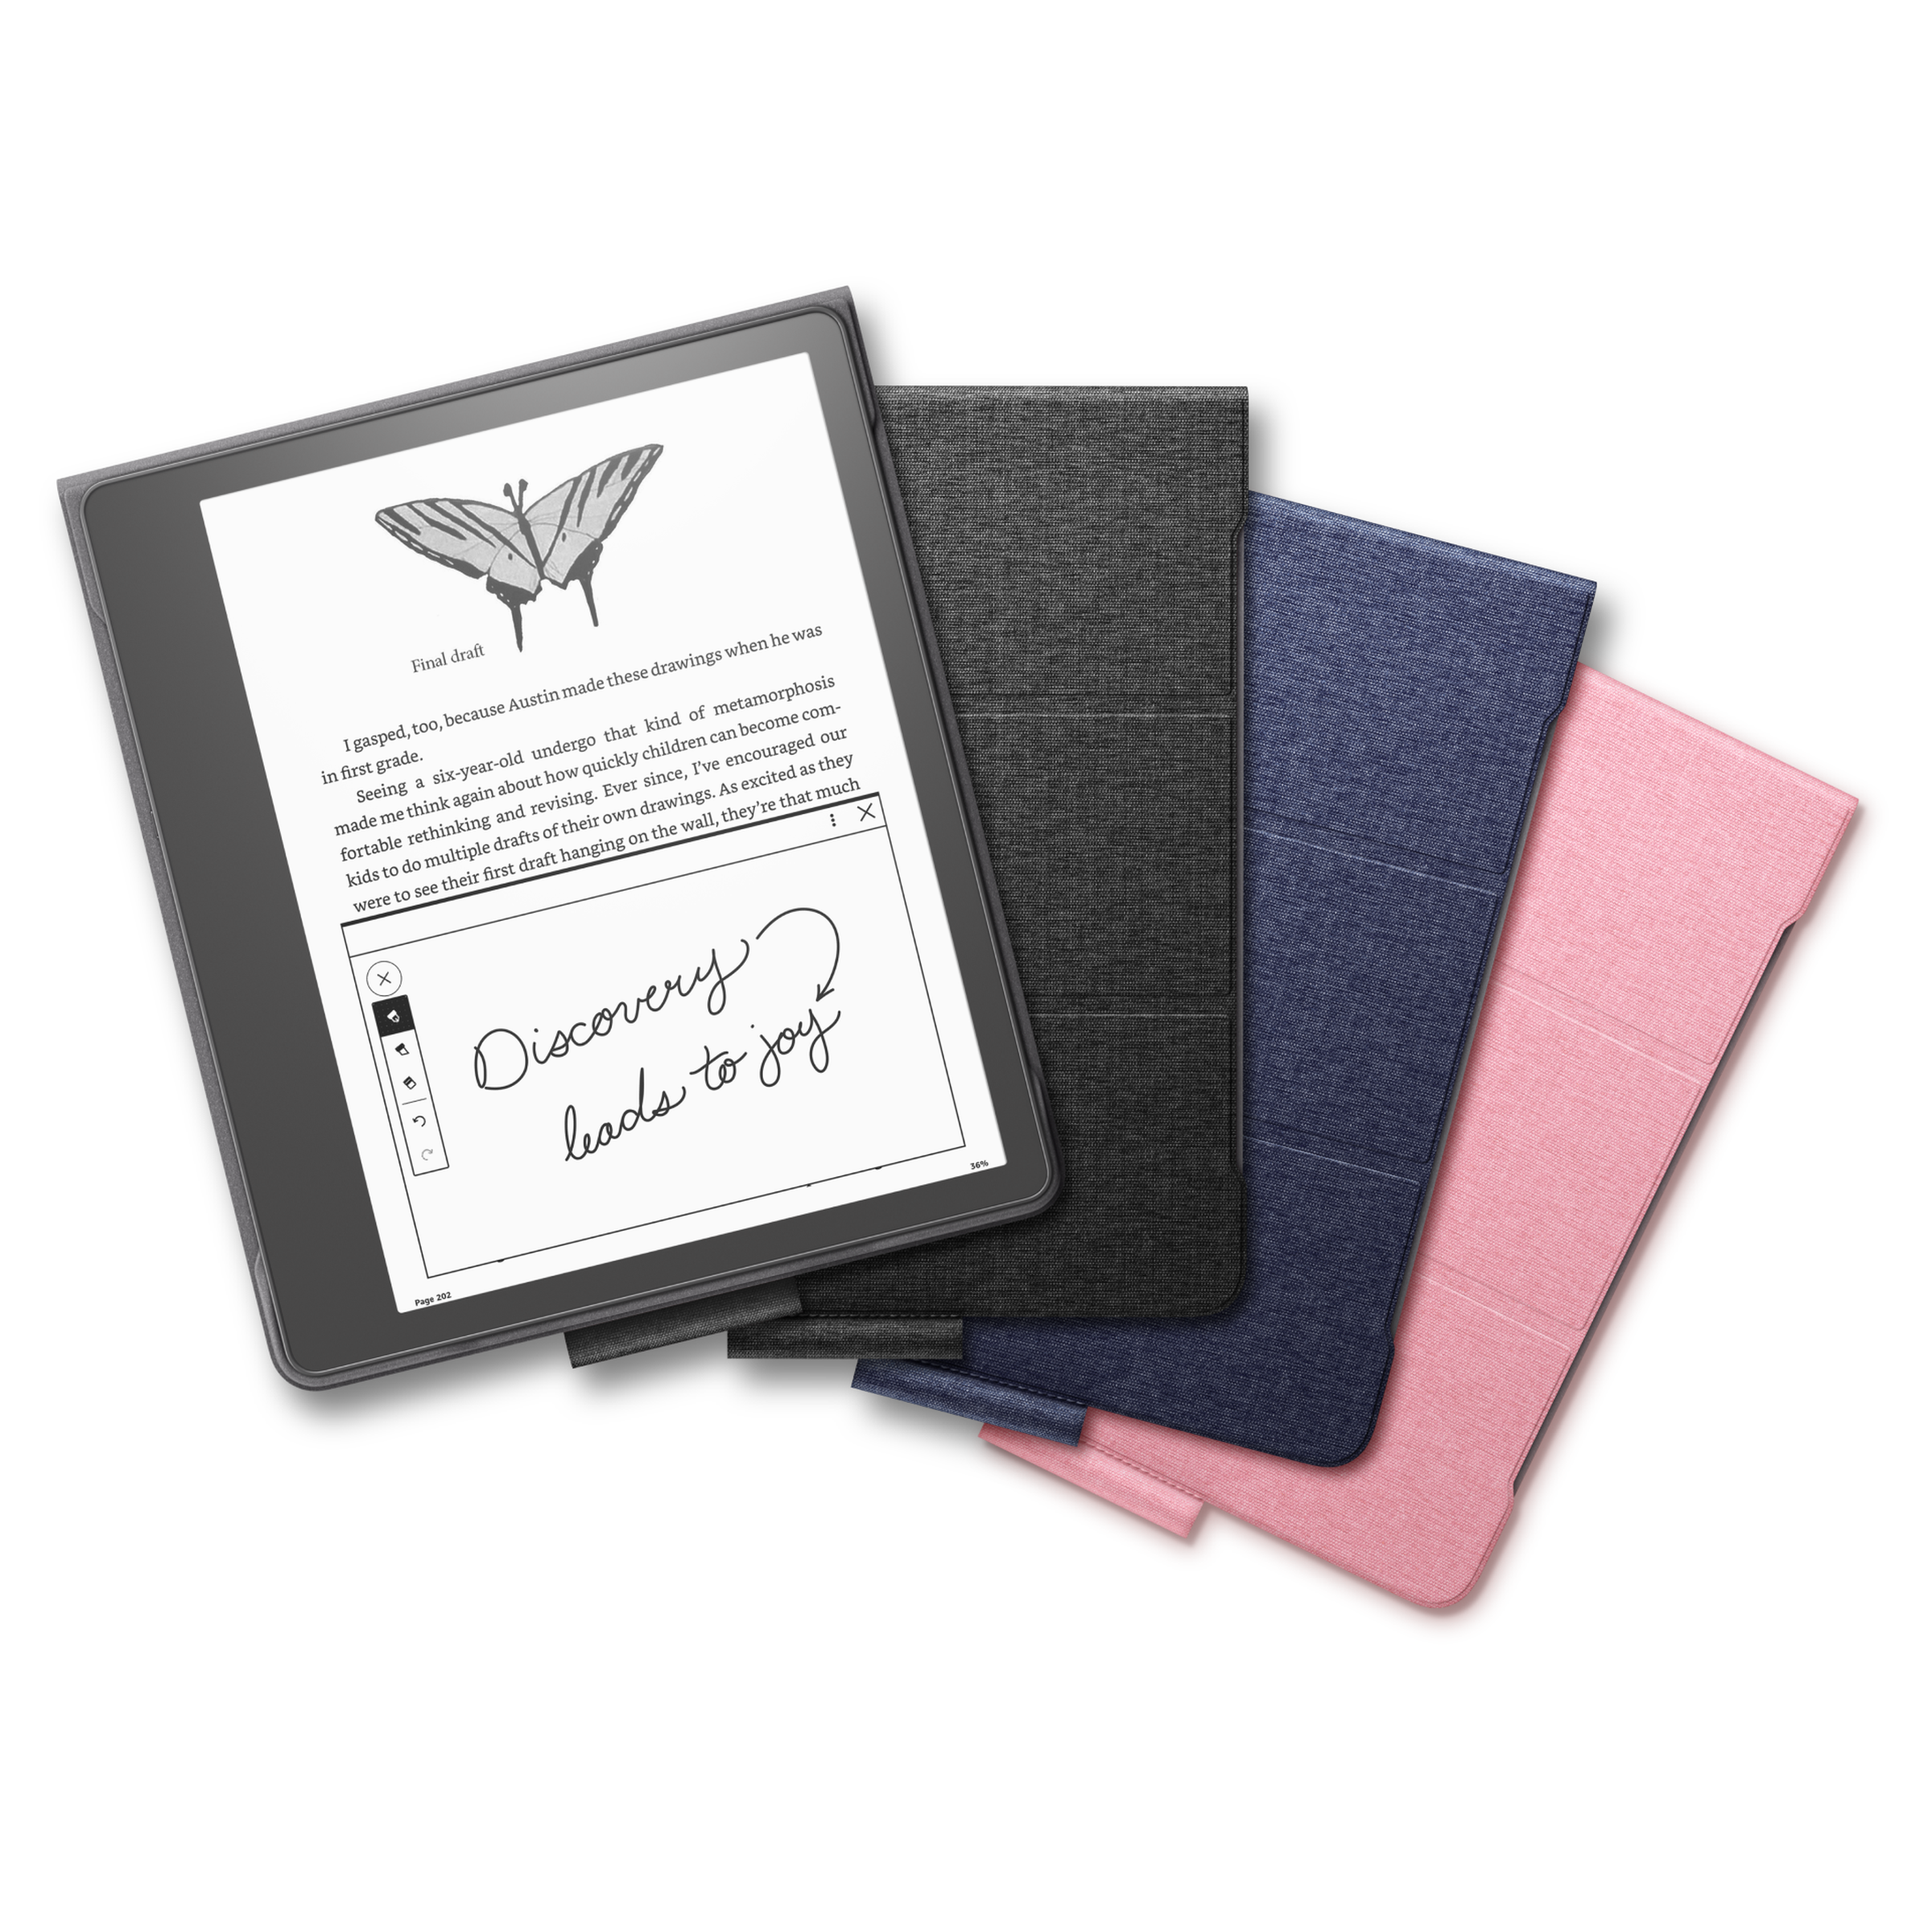 A Kindle Scribe with several colors of cases behind it,